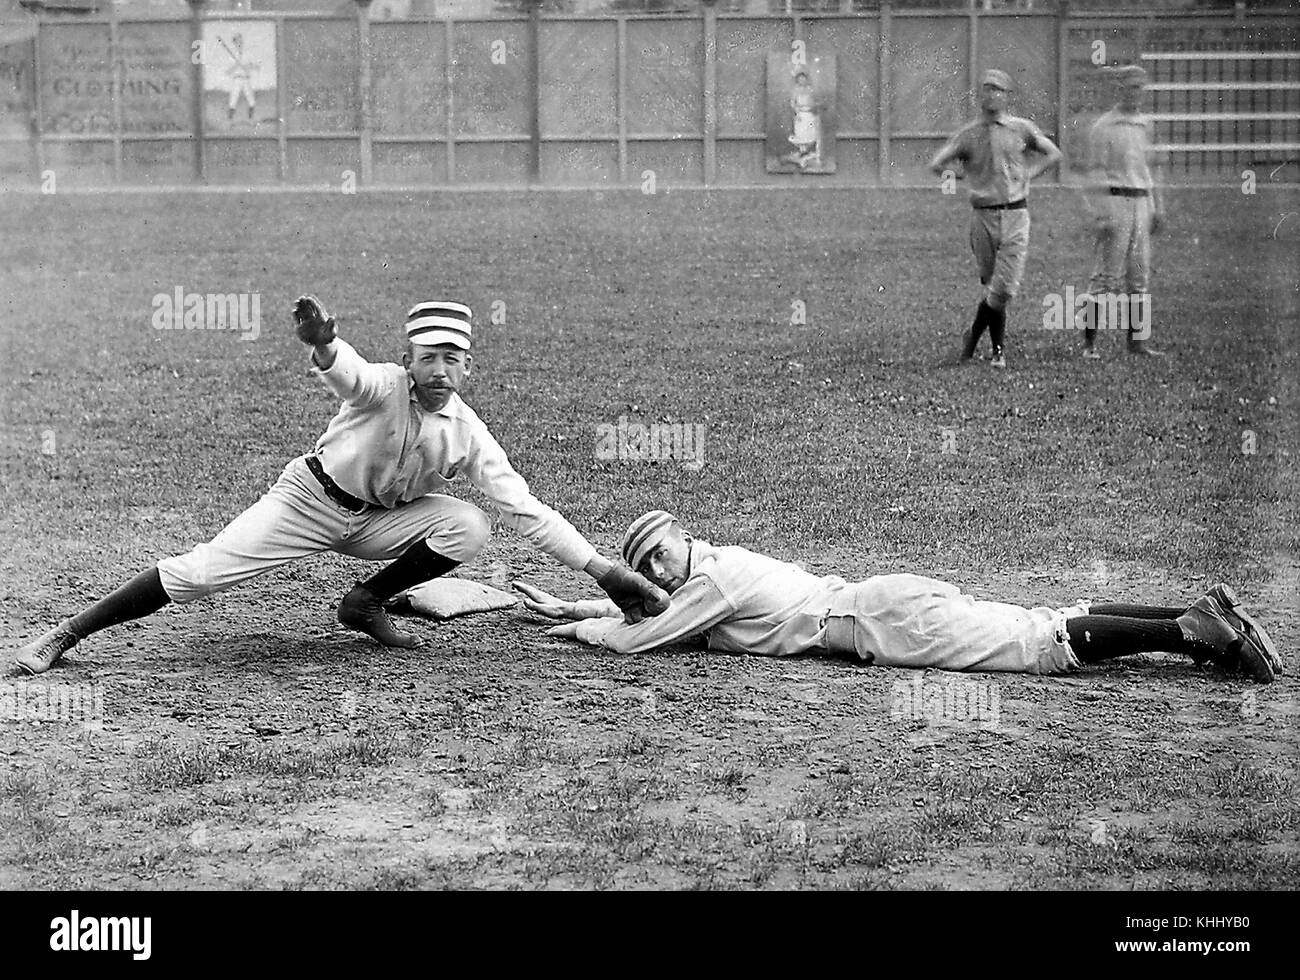 A photographic portrait of two baseball players from the Philadelphia Quakers, Arthur Irwin is pretending to tag out Tommy McCarthy who is pretending to be sliding headfirst in to a base, 1900. From the New York Public Library. Stock Photo